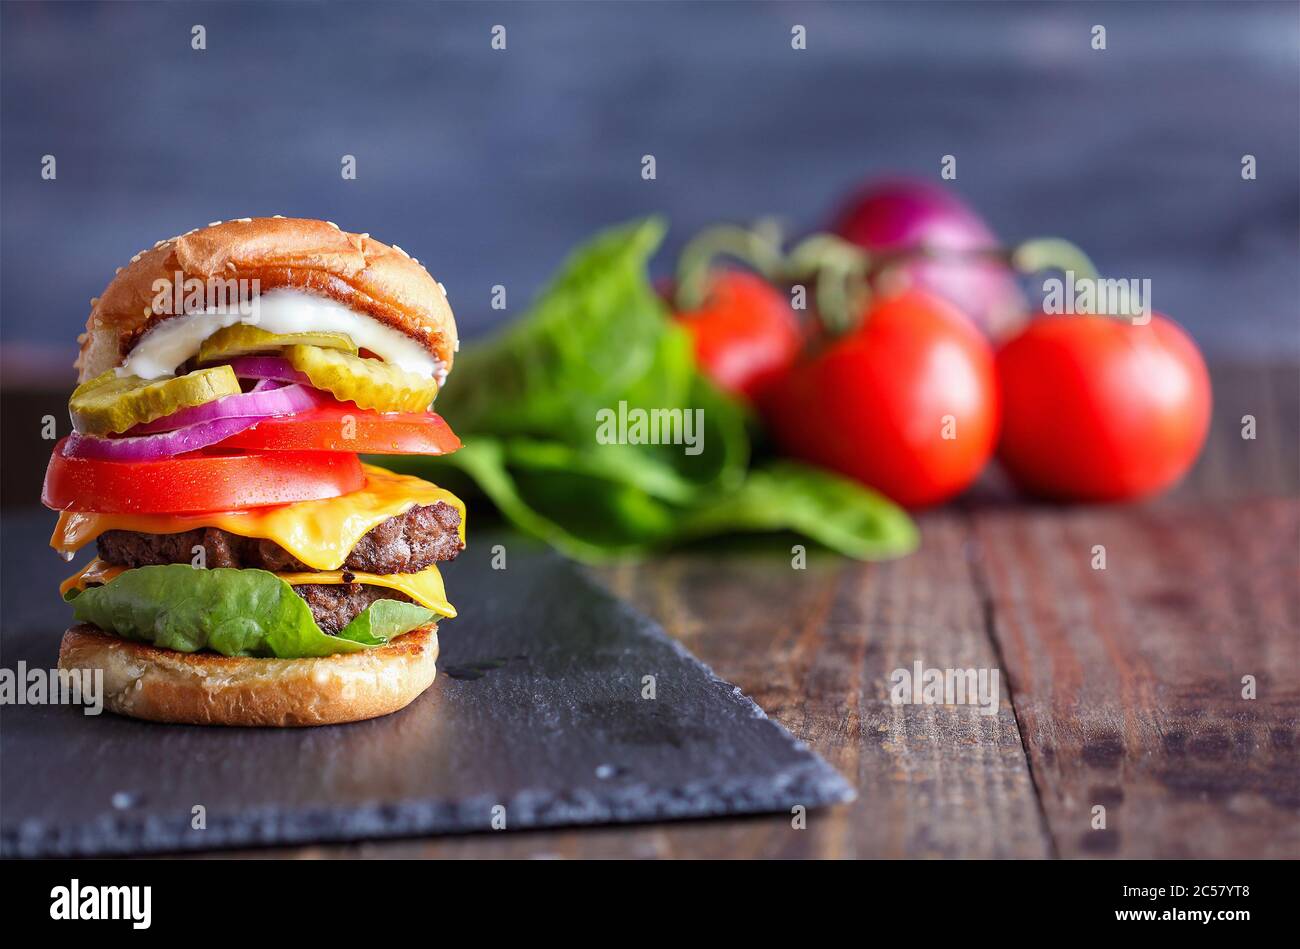 A big, fat, juicy double cheeseburger made with two 100% beef patties, slices of melted cheese, onions, pickles, lettuce, tomatoes, and mayo on a fres Stock Photo